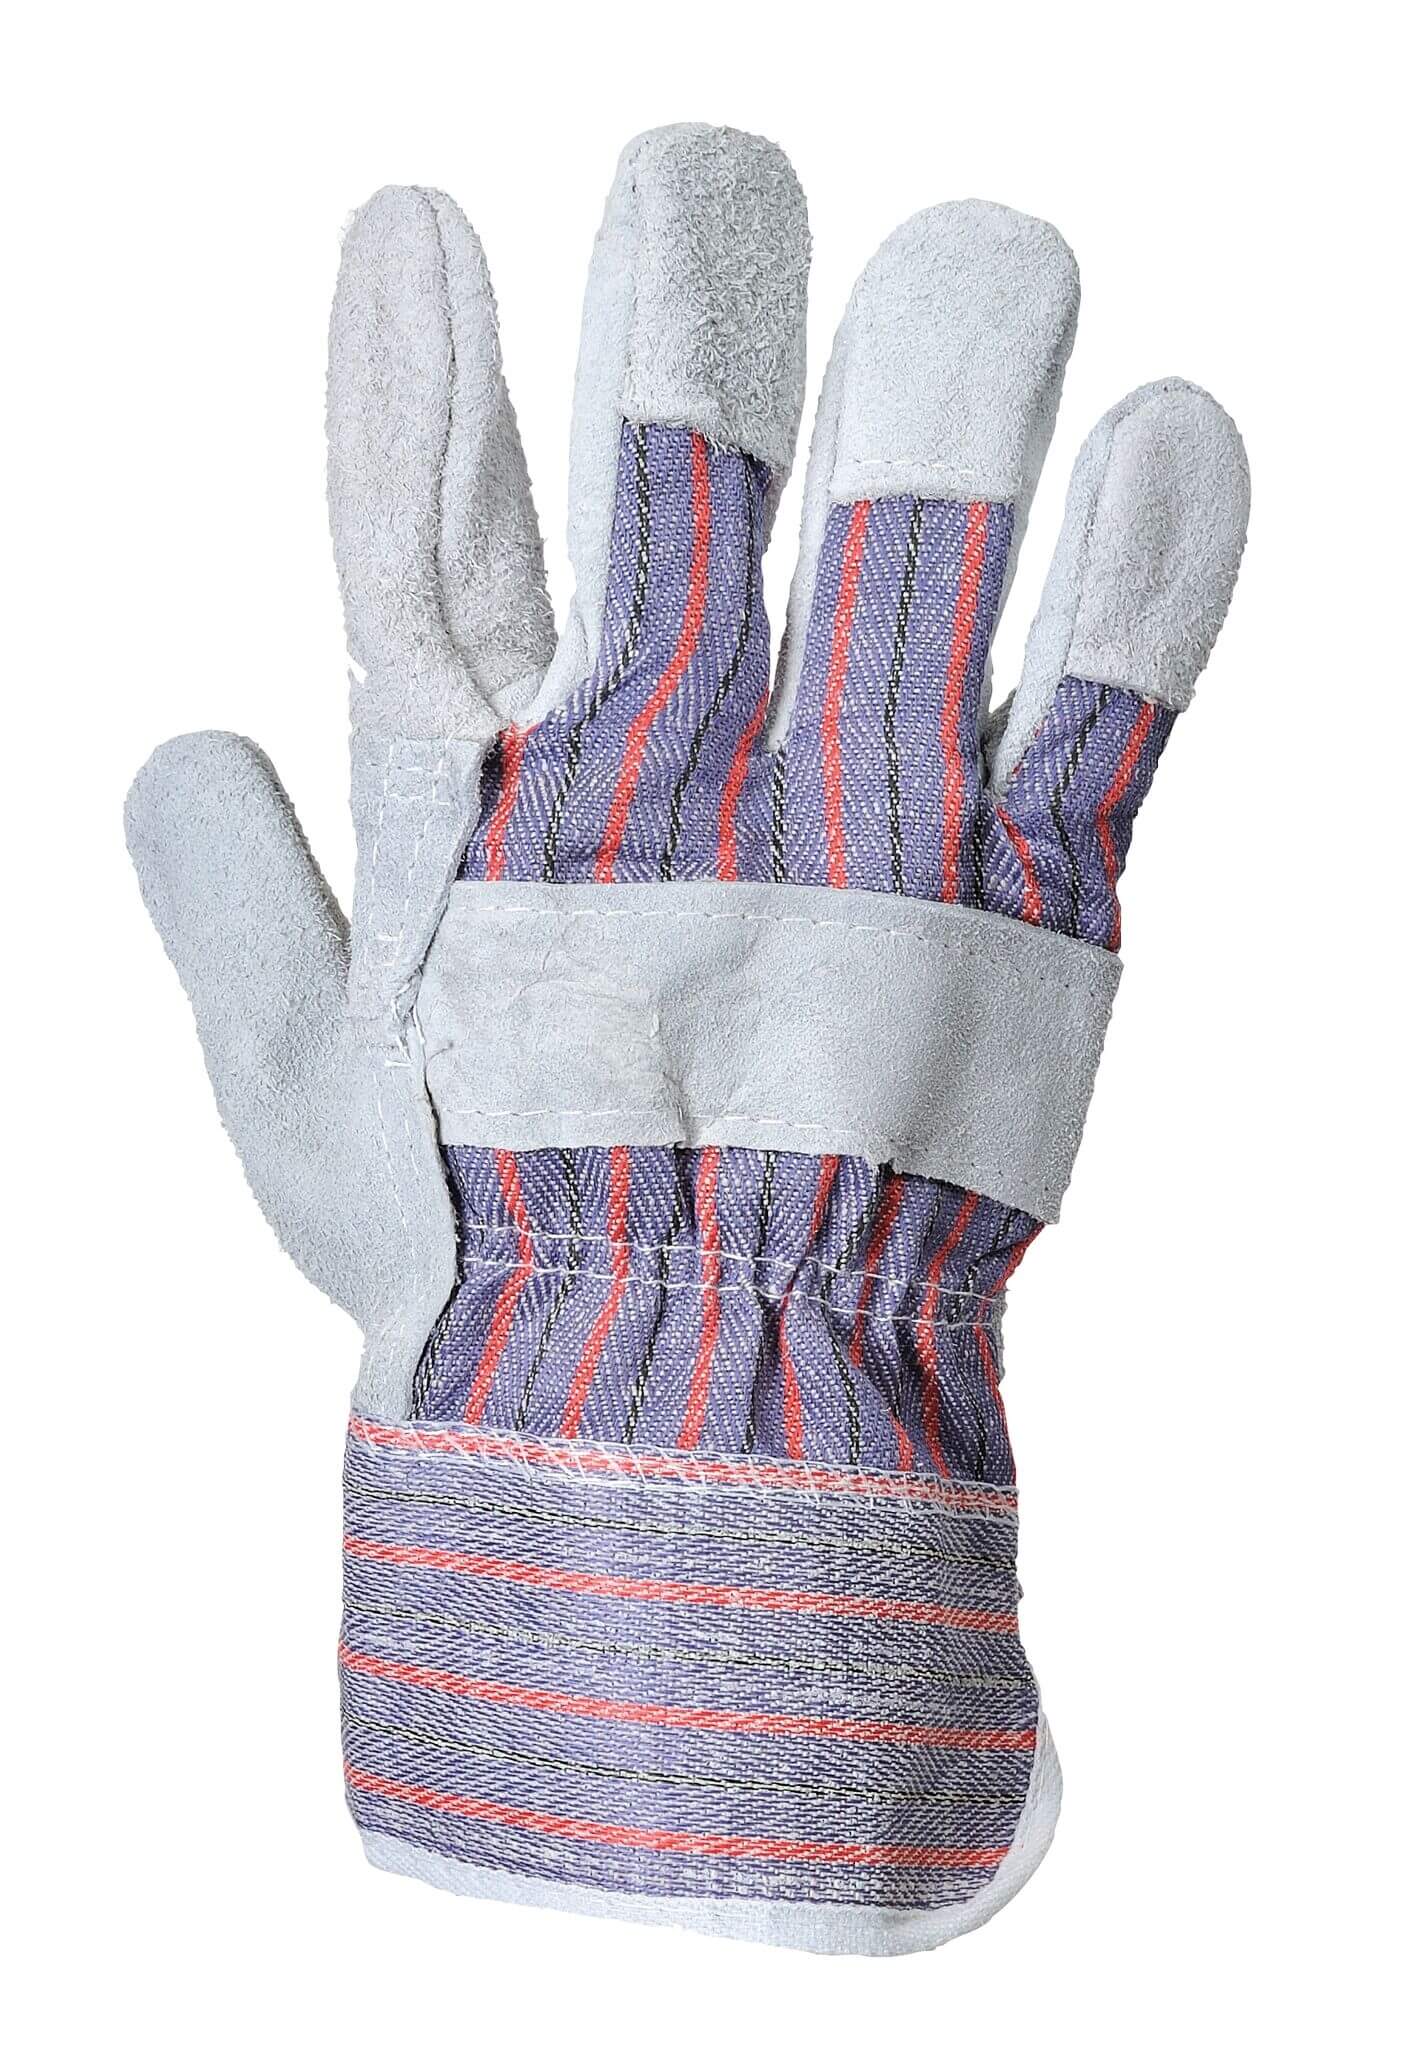 CANADIAN RIGGER GLOVE